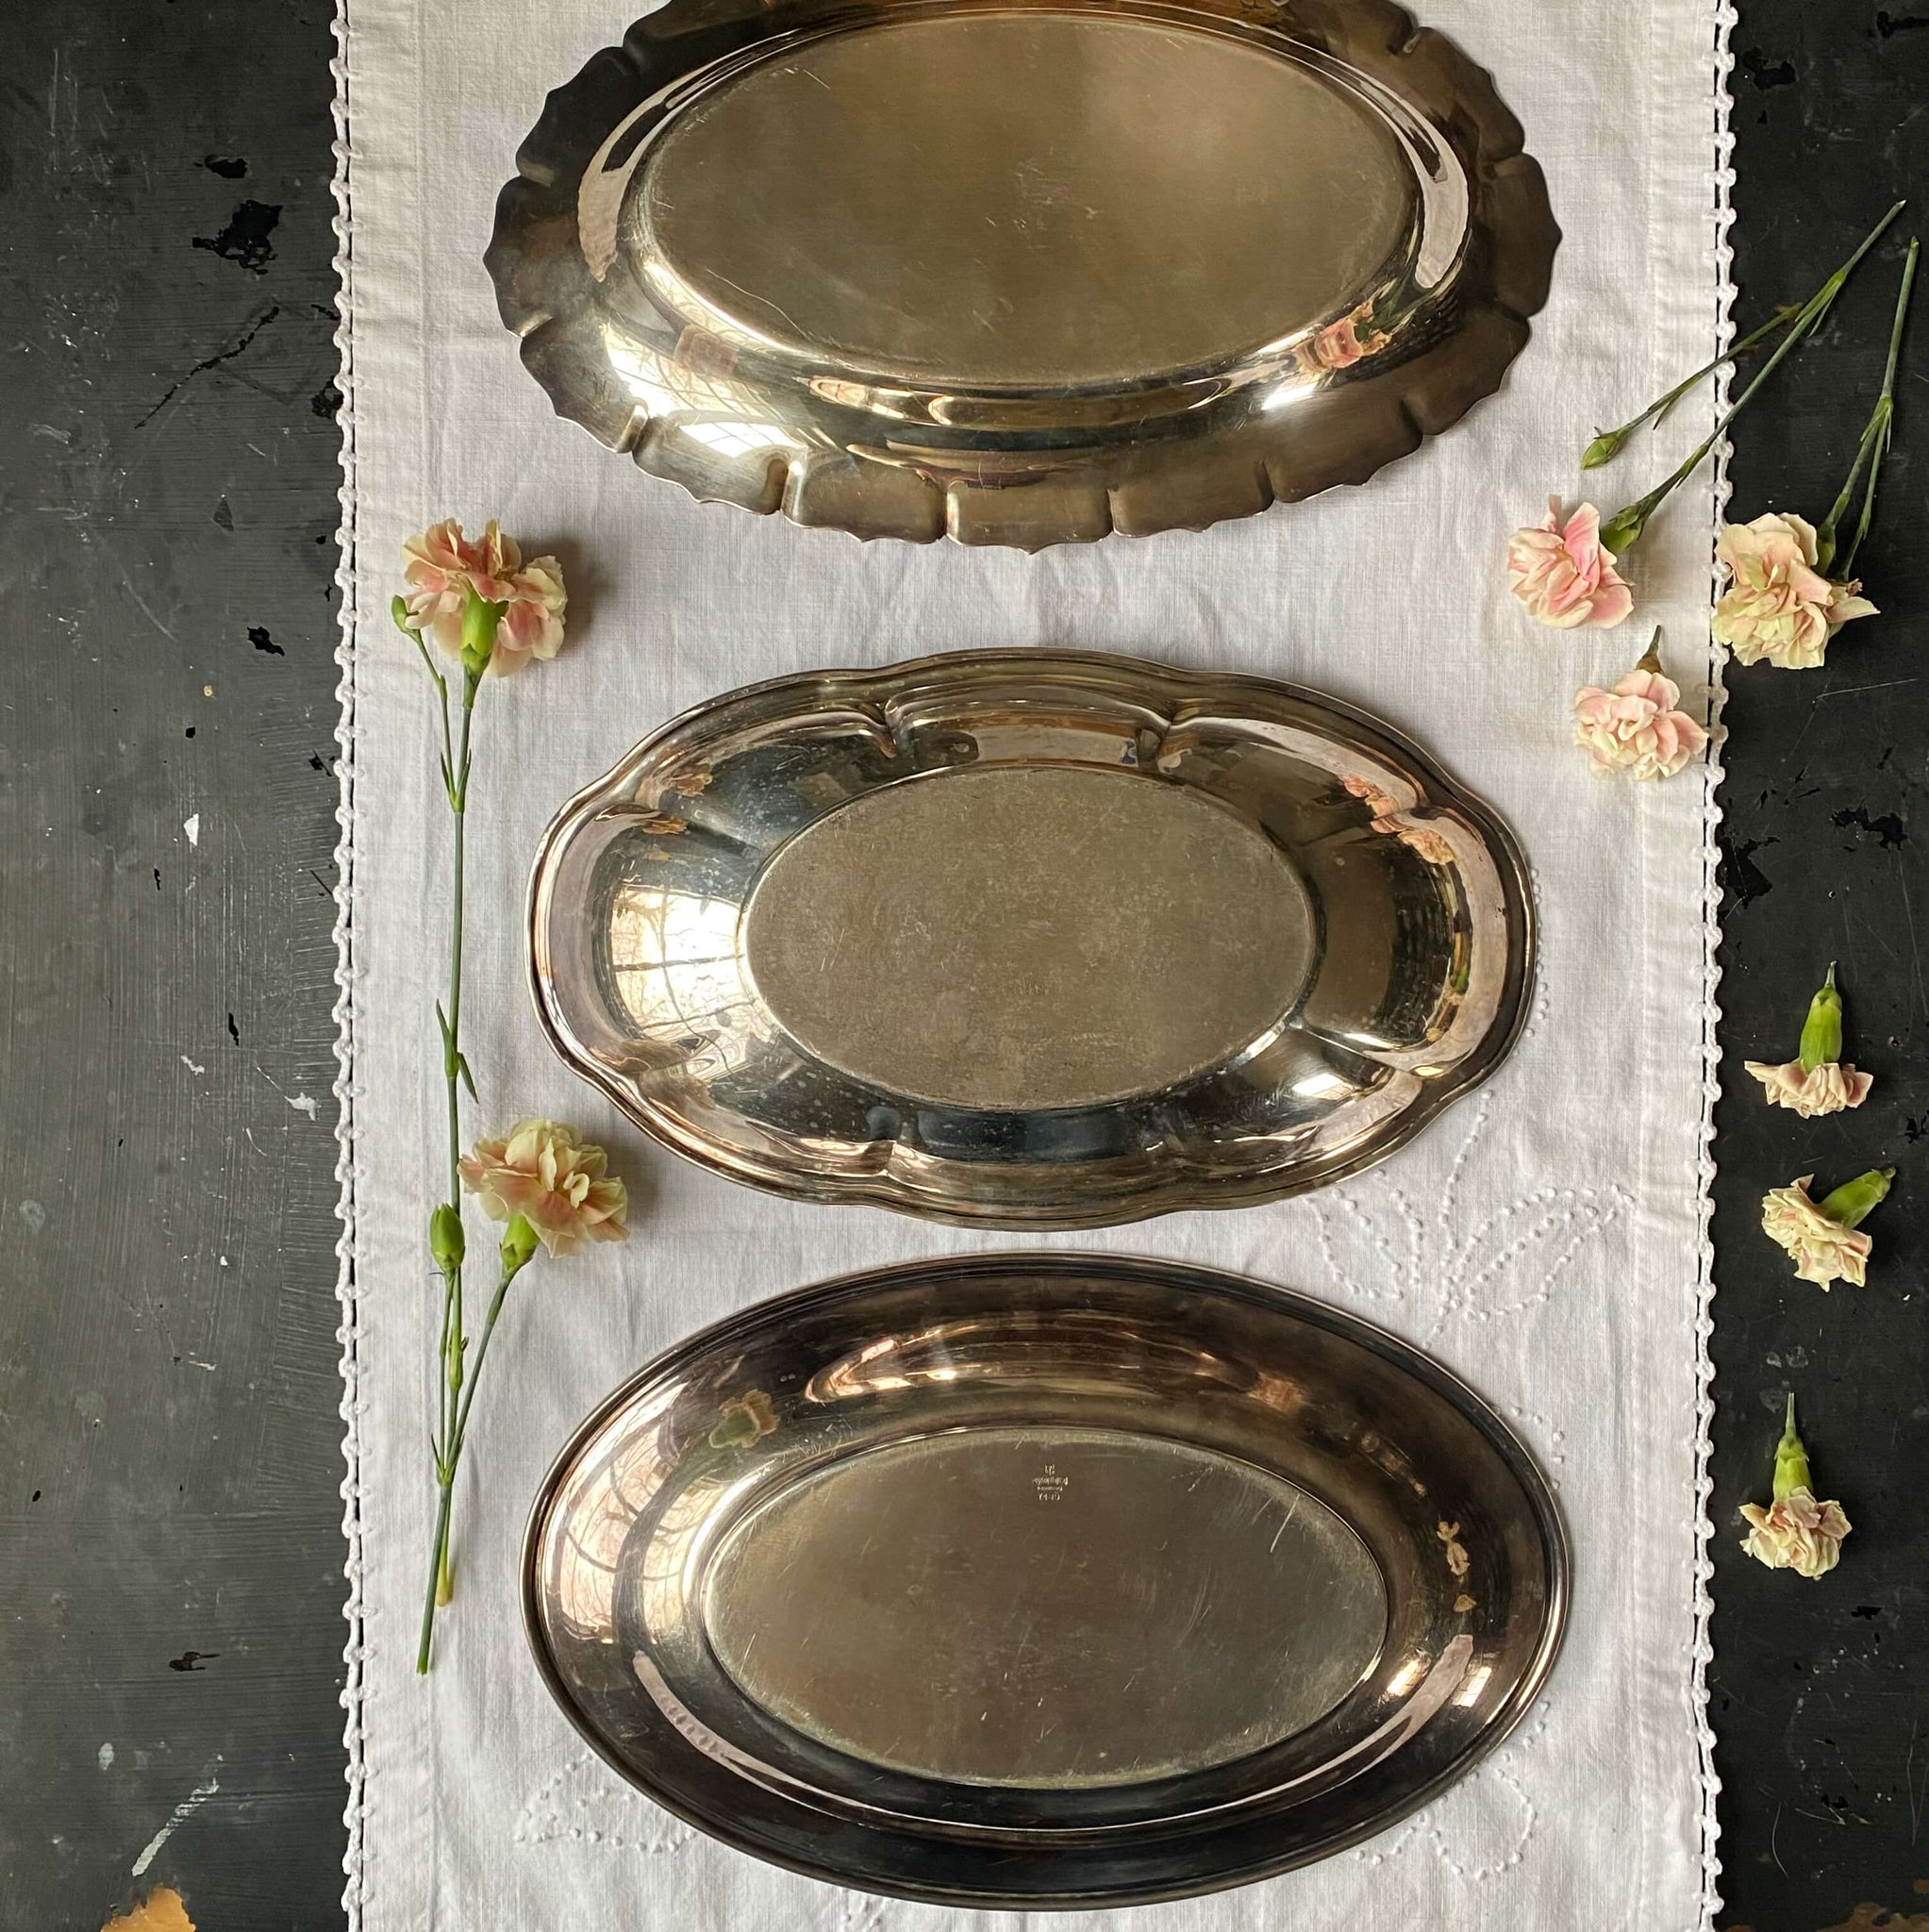 Vintage Silverplate Bread Trays - Mismatched Set of Three by Gorham, Art Silver Co and International Silver circa 1920s-1950s